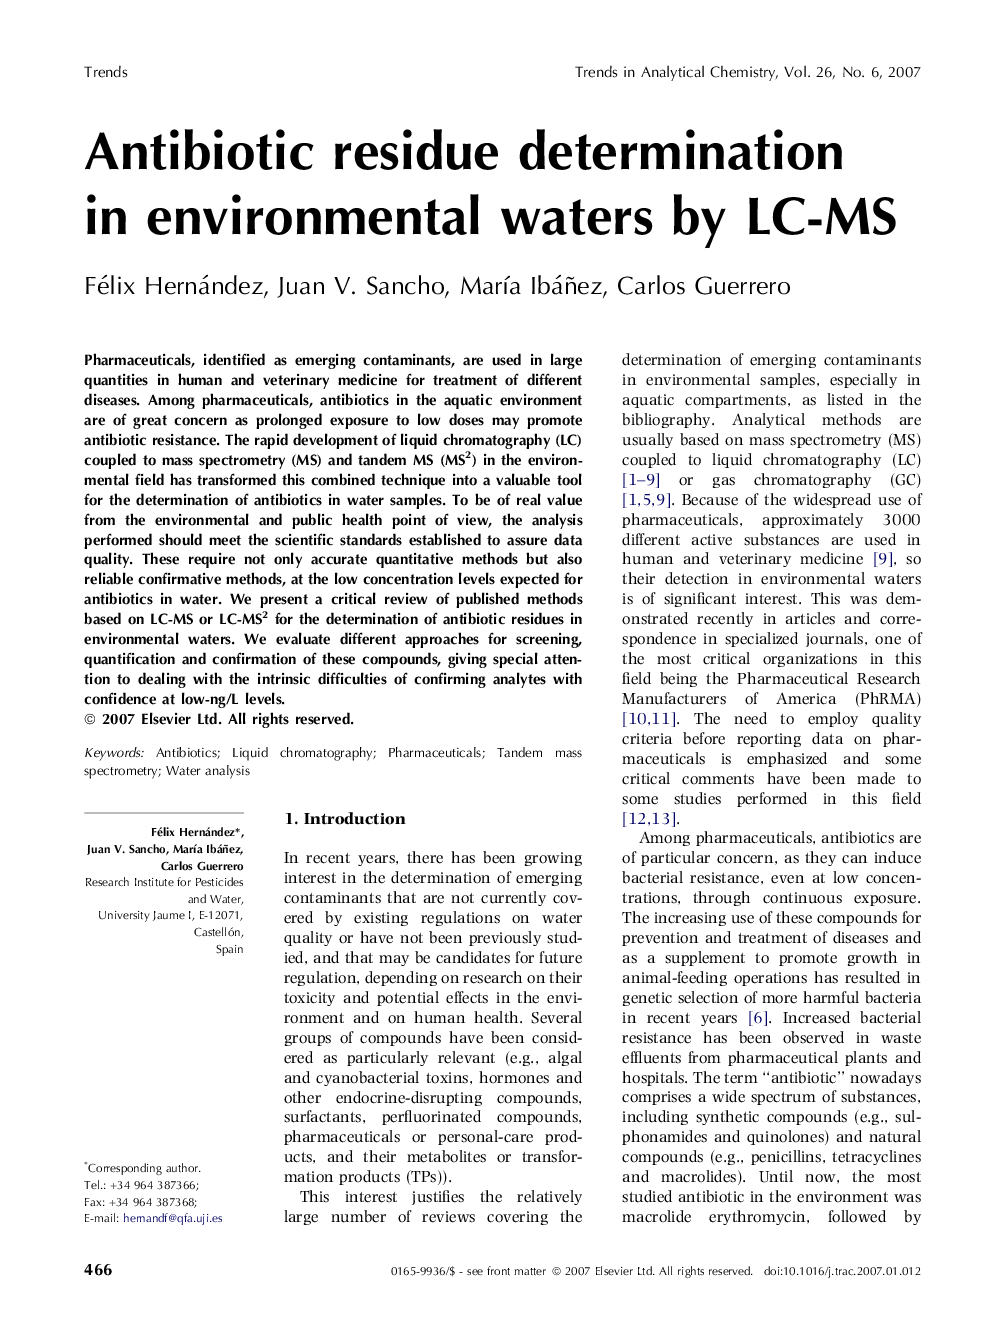 Antibiotic residue determination in environmental waters by LC-MS